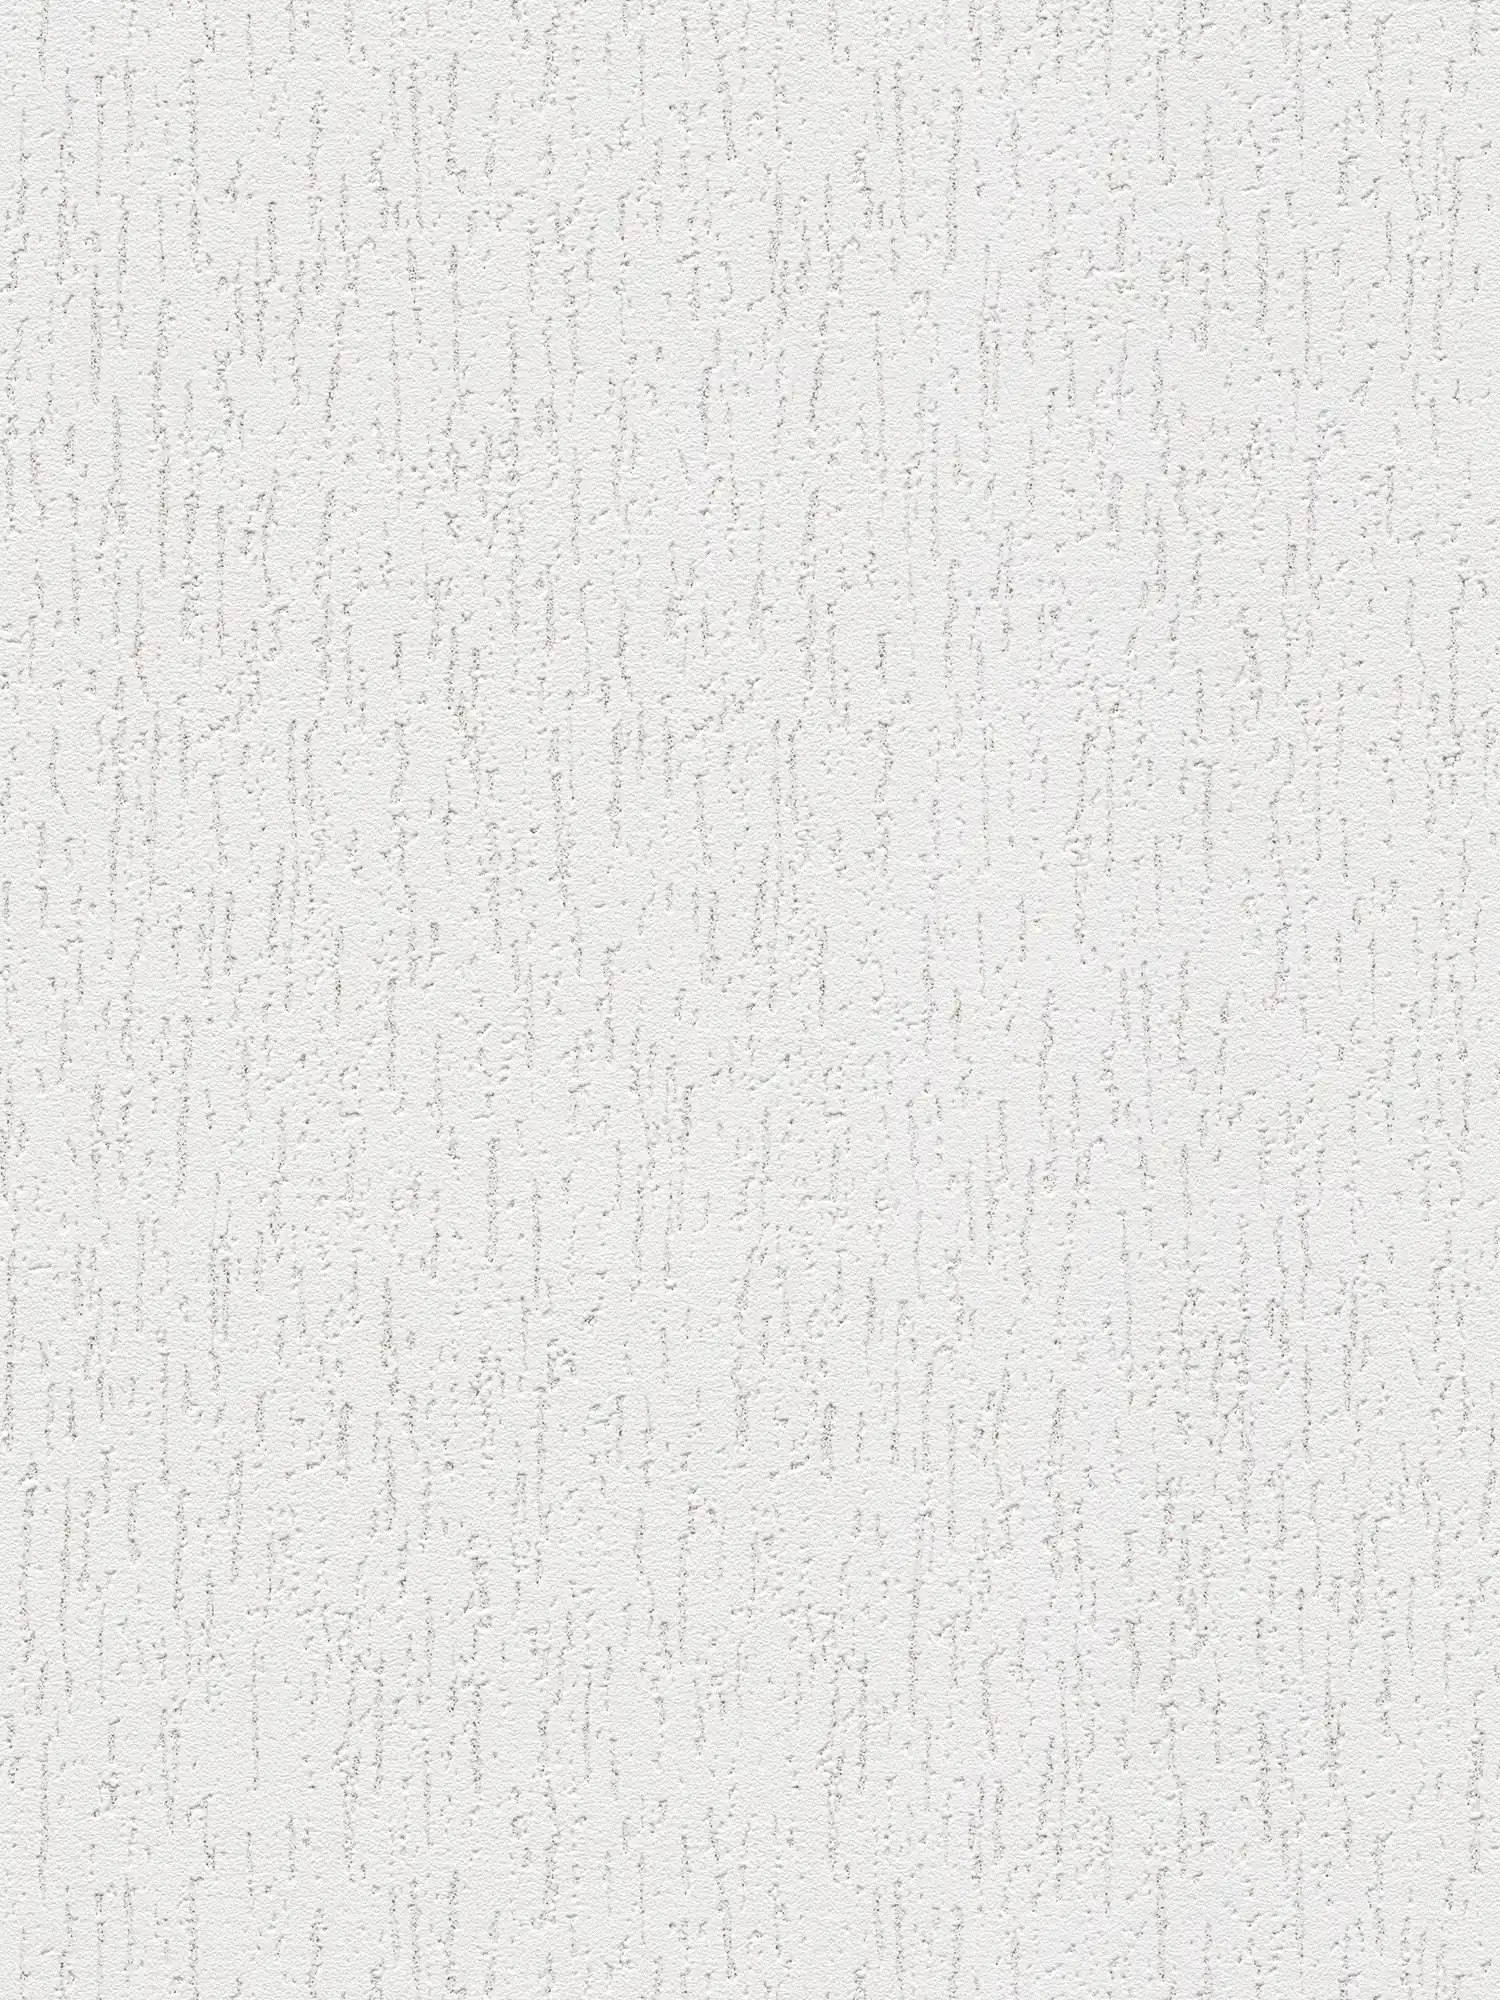 Wallpaper with roughcast look & foam structure - brown, white
